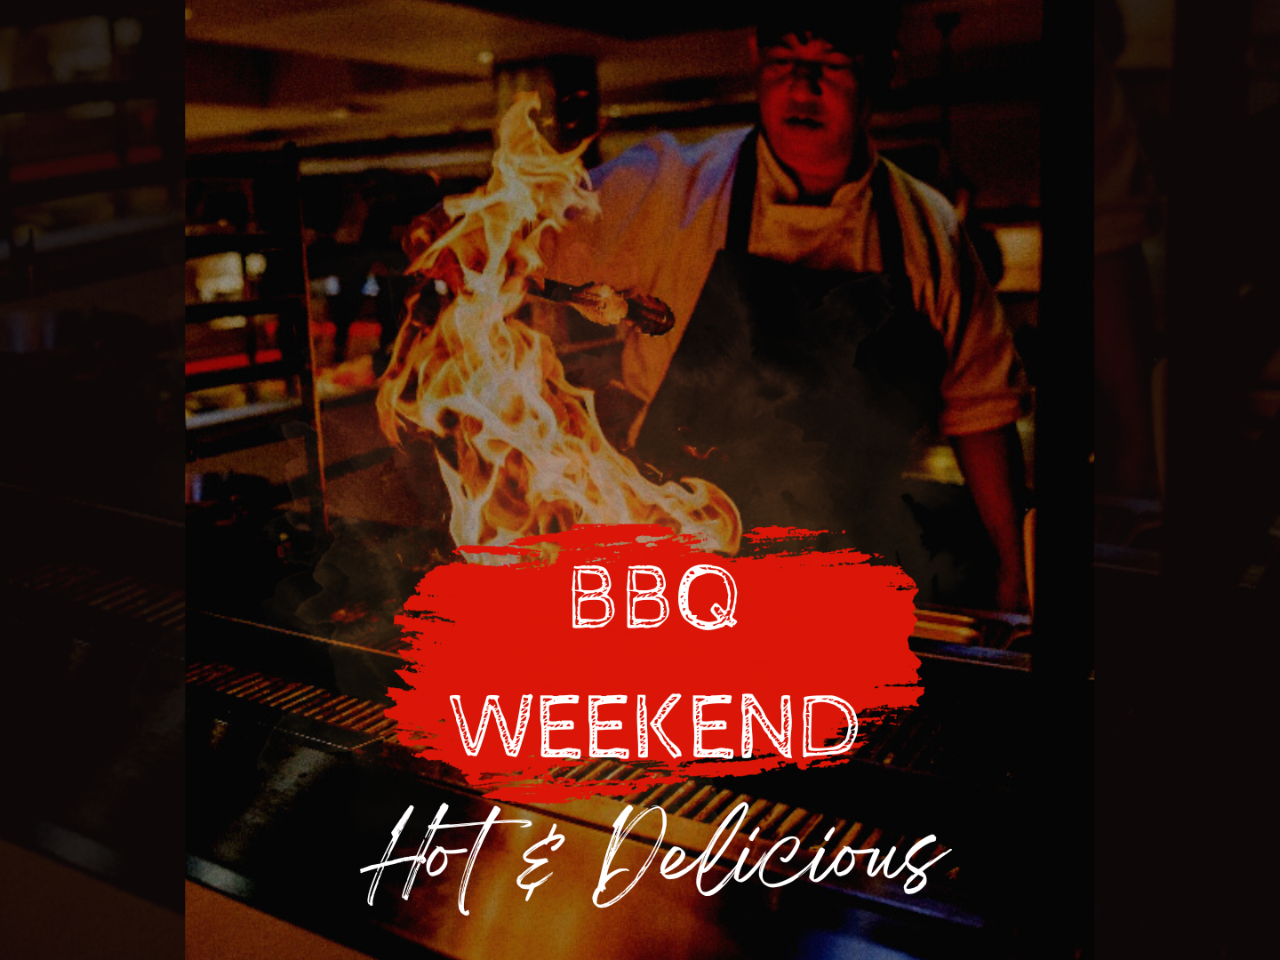 Grill, Eat, Repeat: Indulge in a Memorable BBQ Weekend!